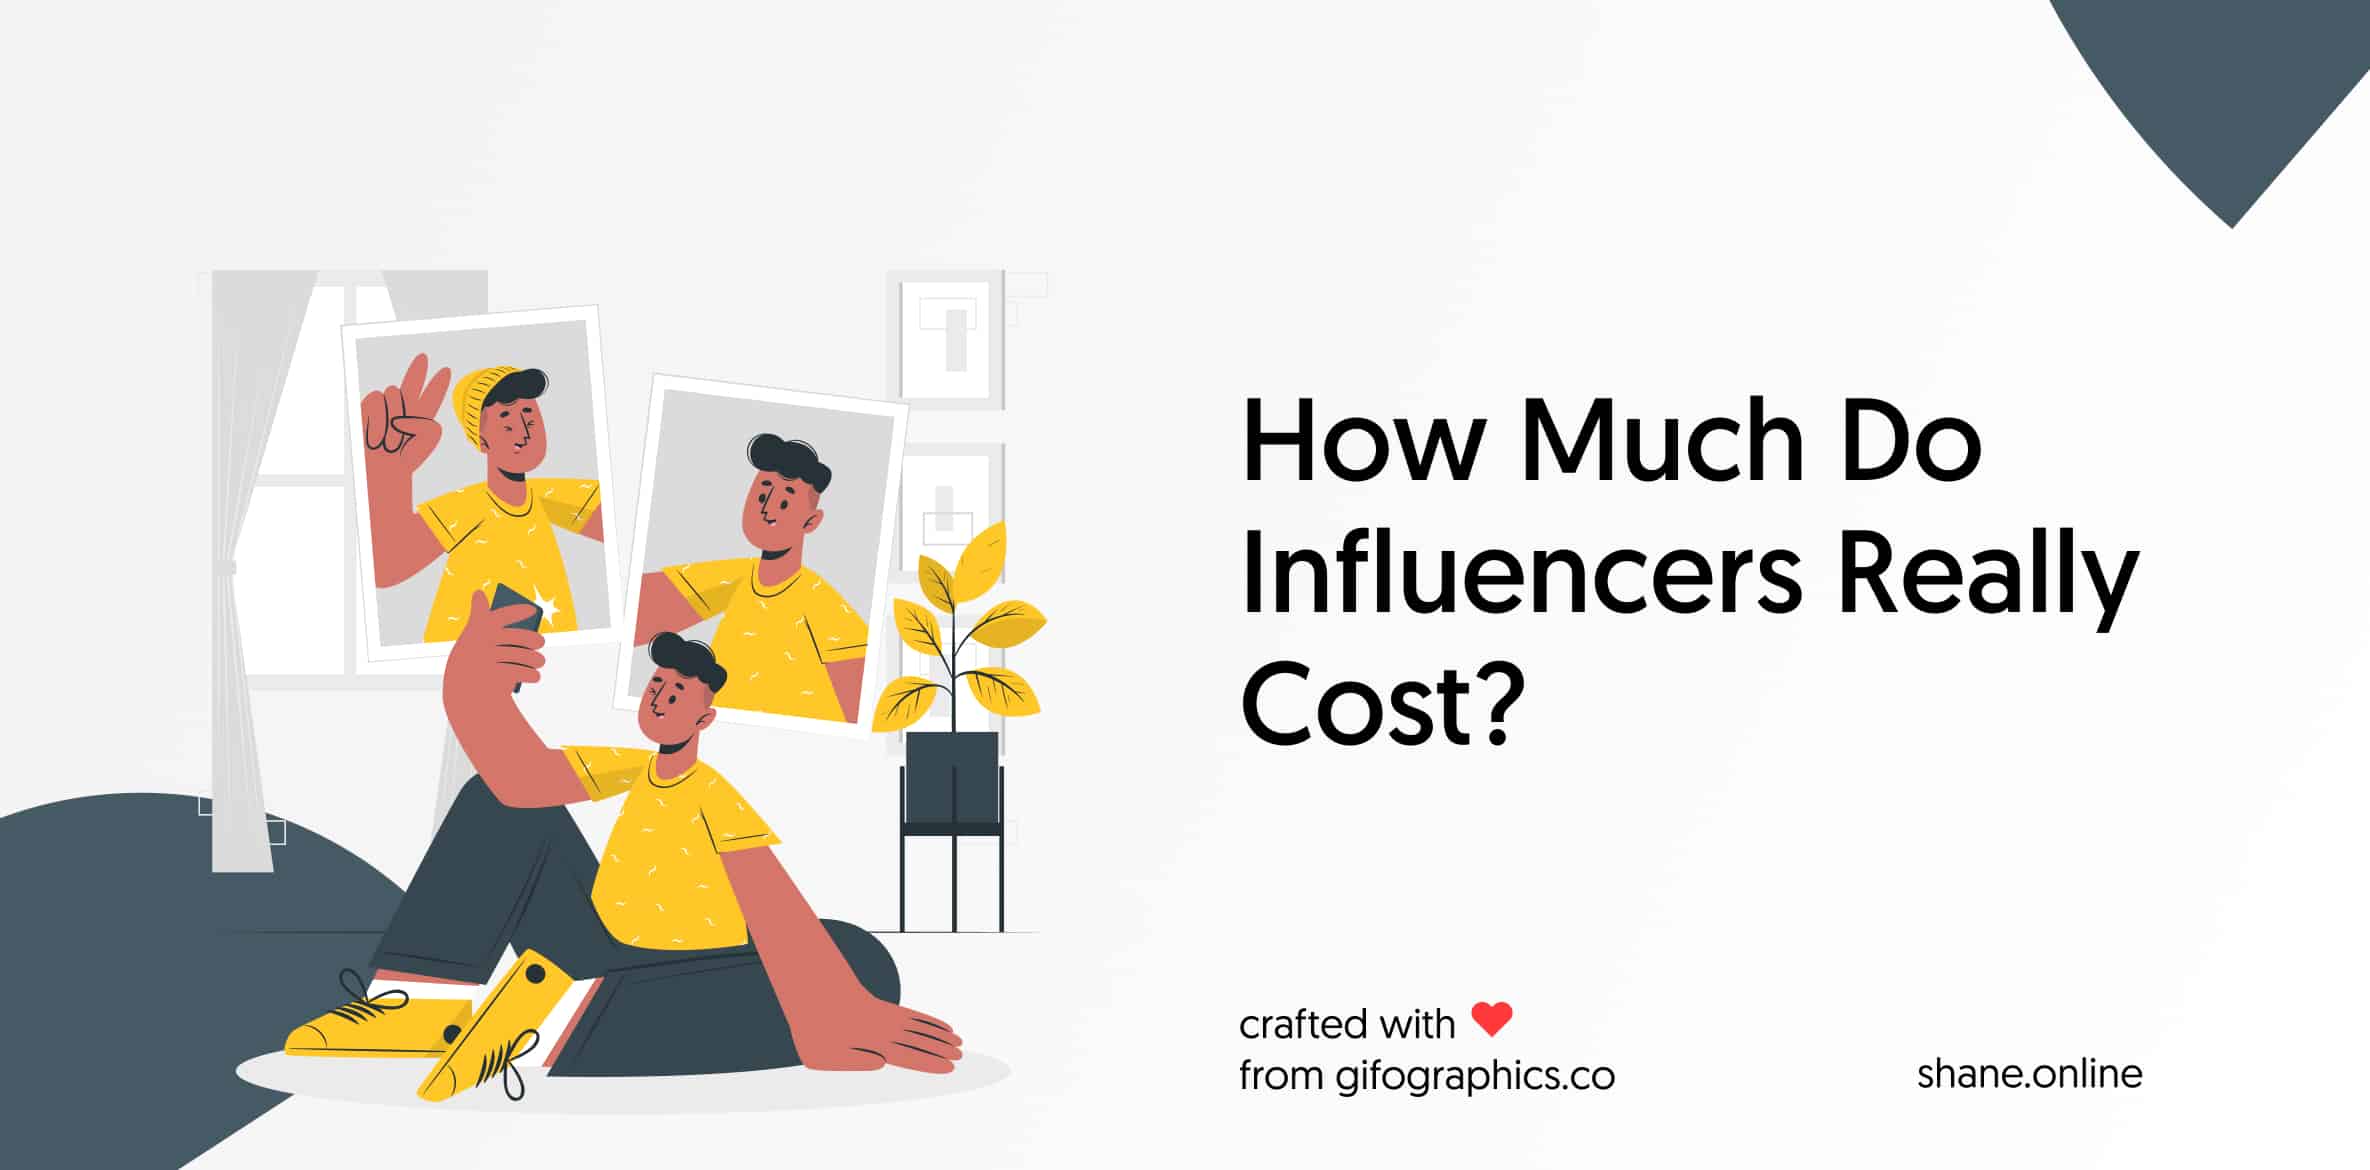 How Much Do Influencers Really Cost